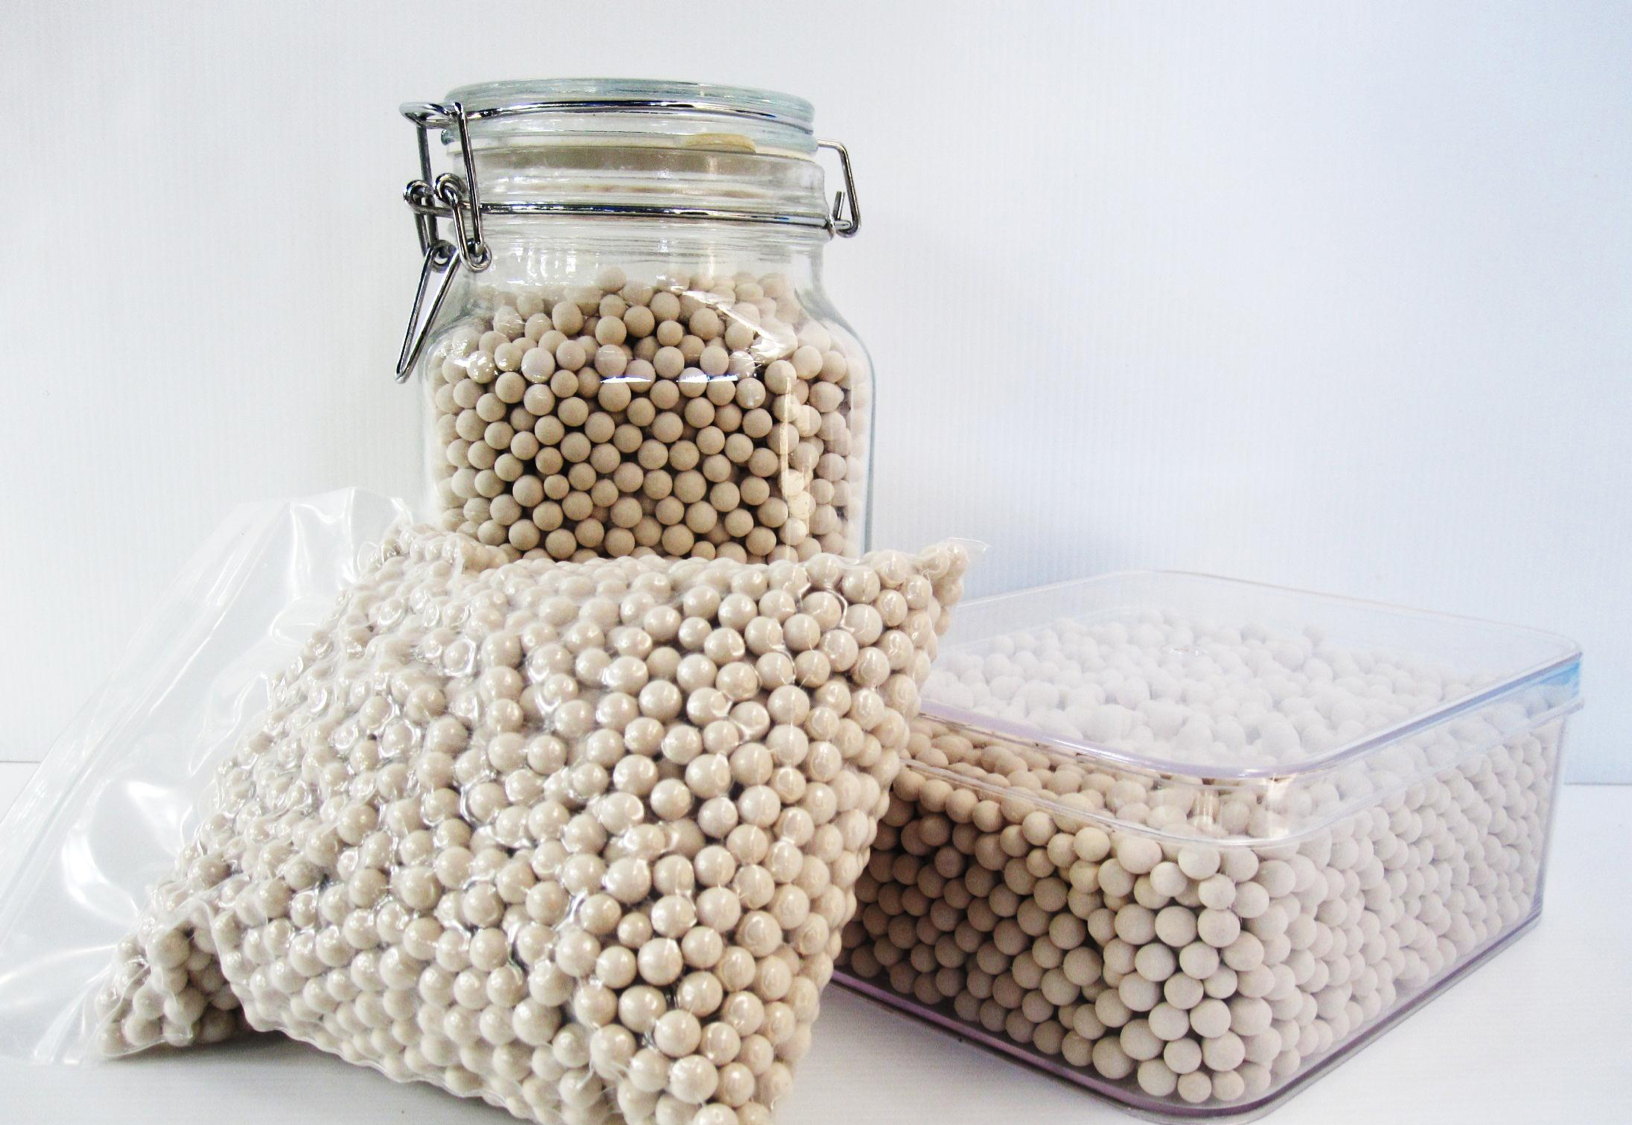 These zeolite beads can be packaged with crops and seeds to keep them dry.